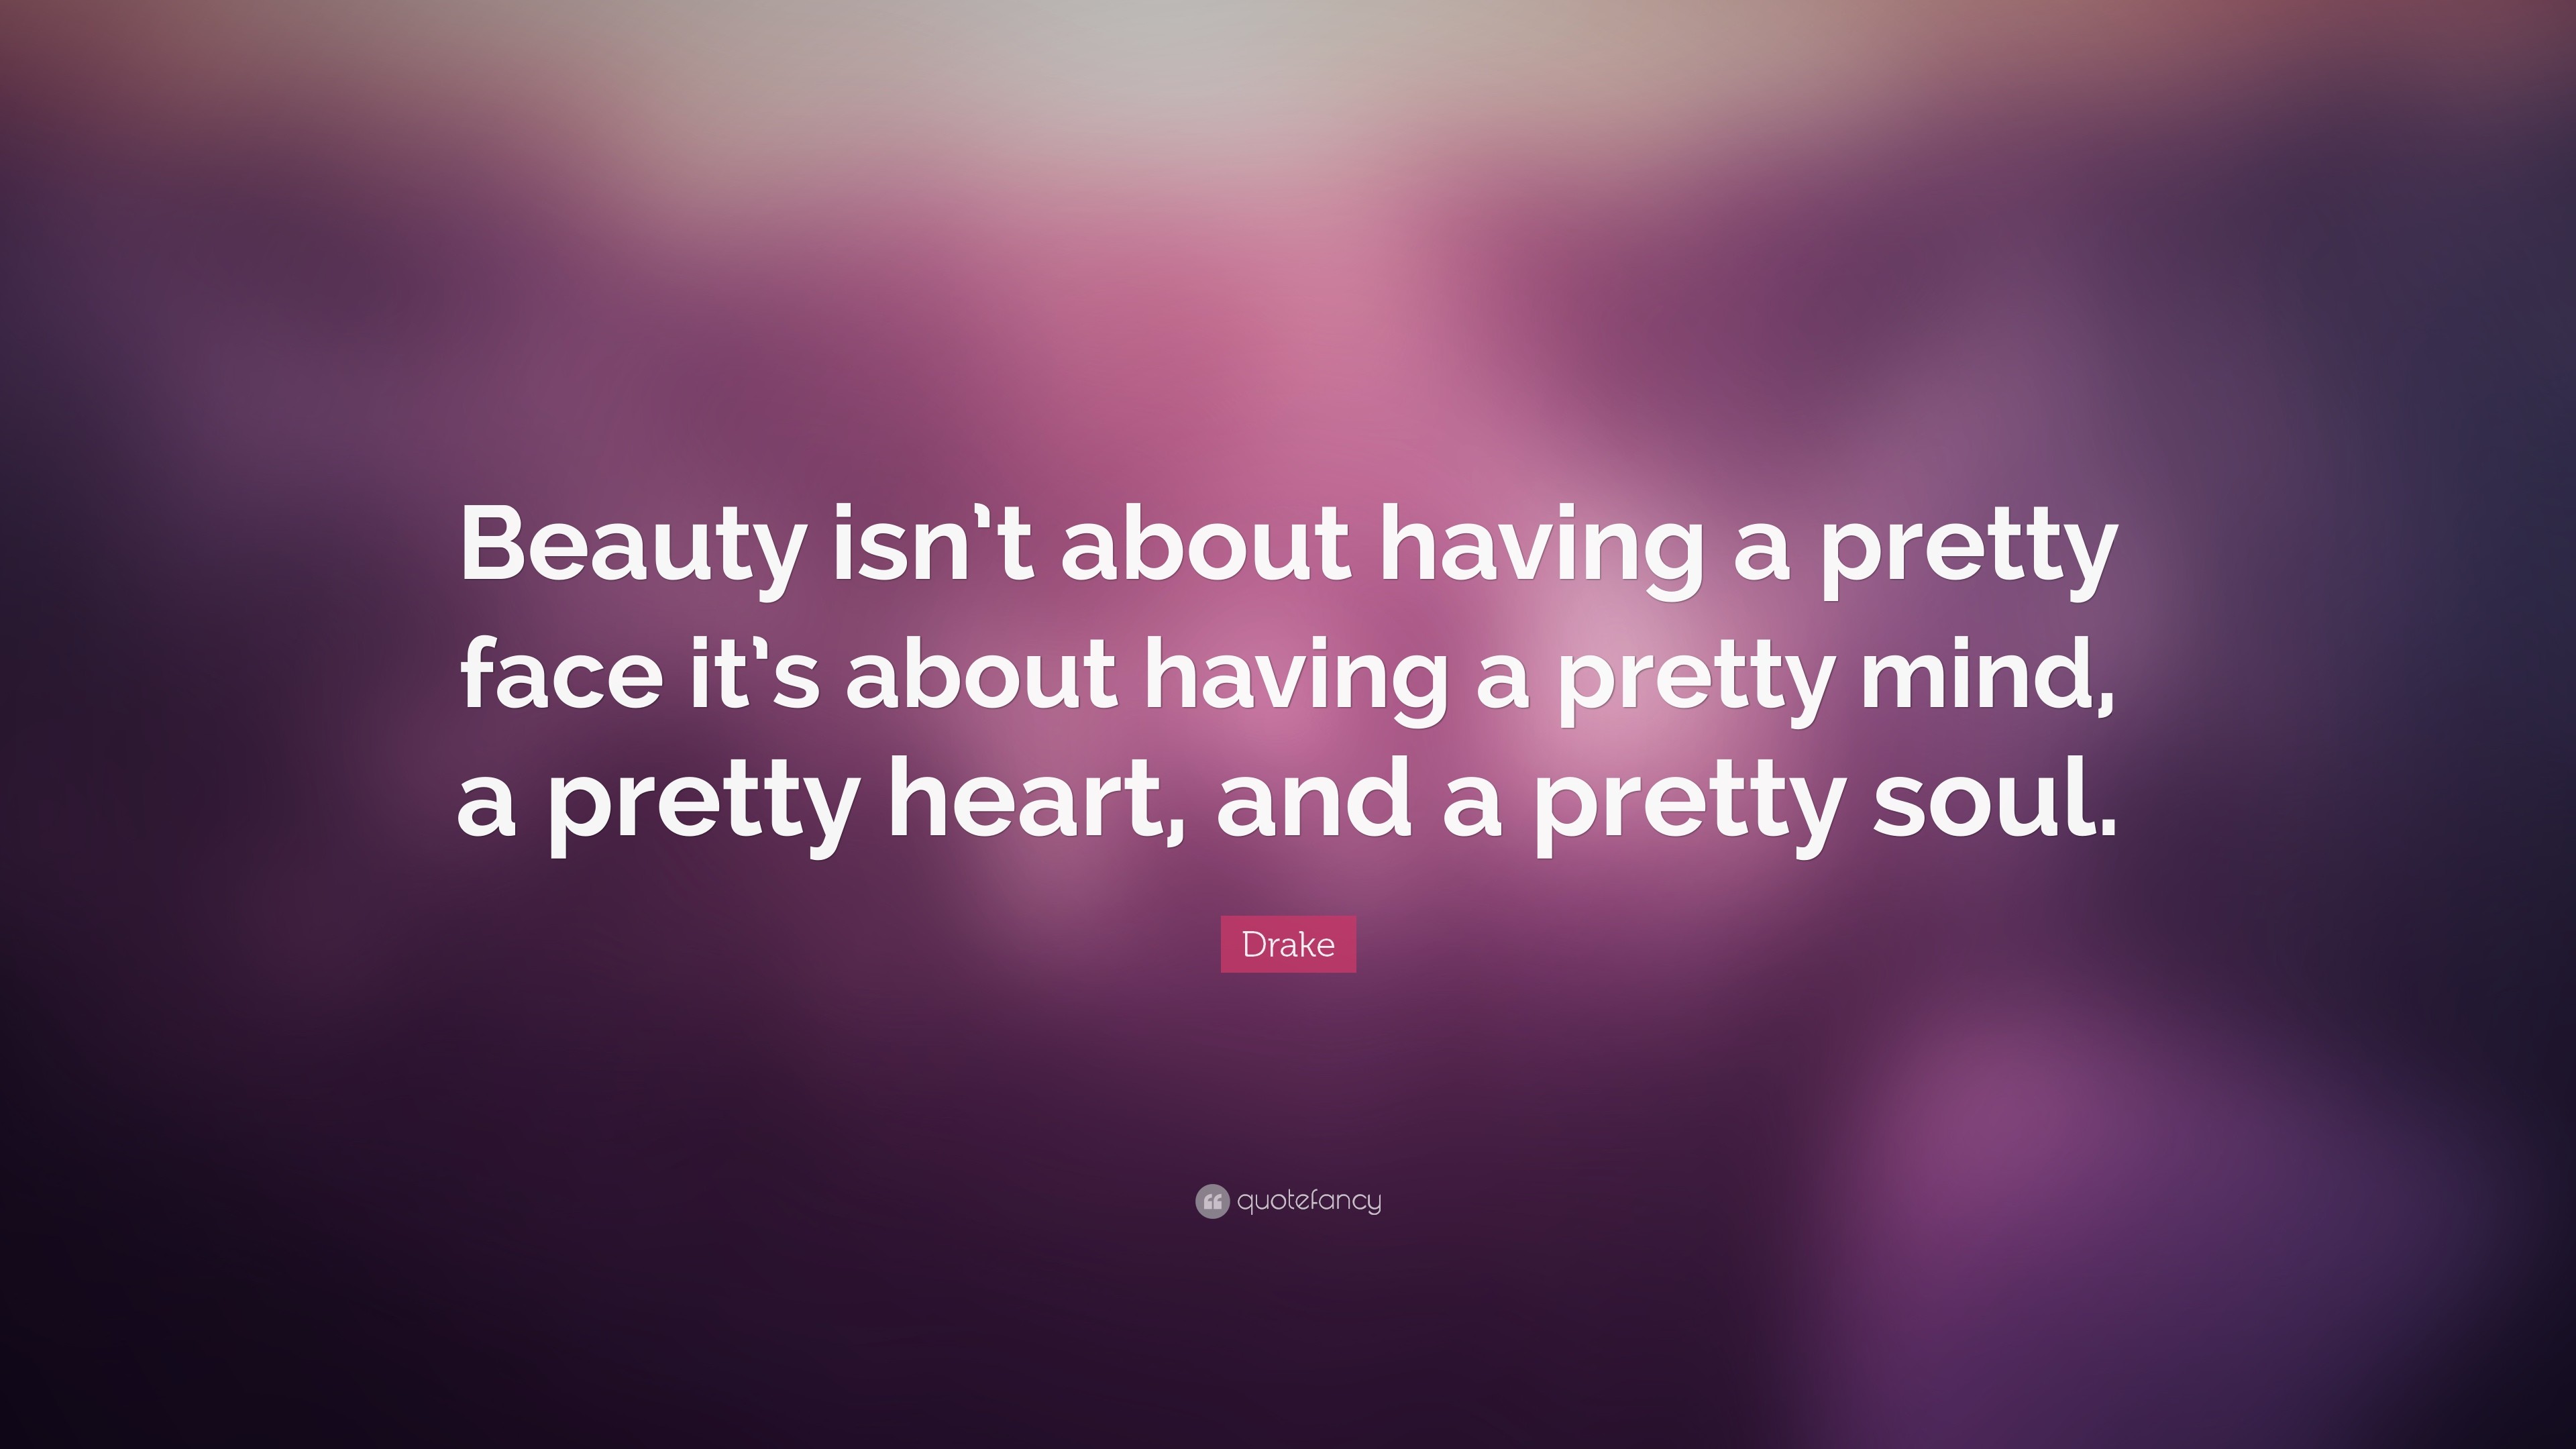 3840x2160 Drake Quote: “Beauty isn't about having a pretty face it's about having